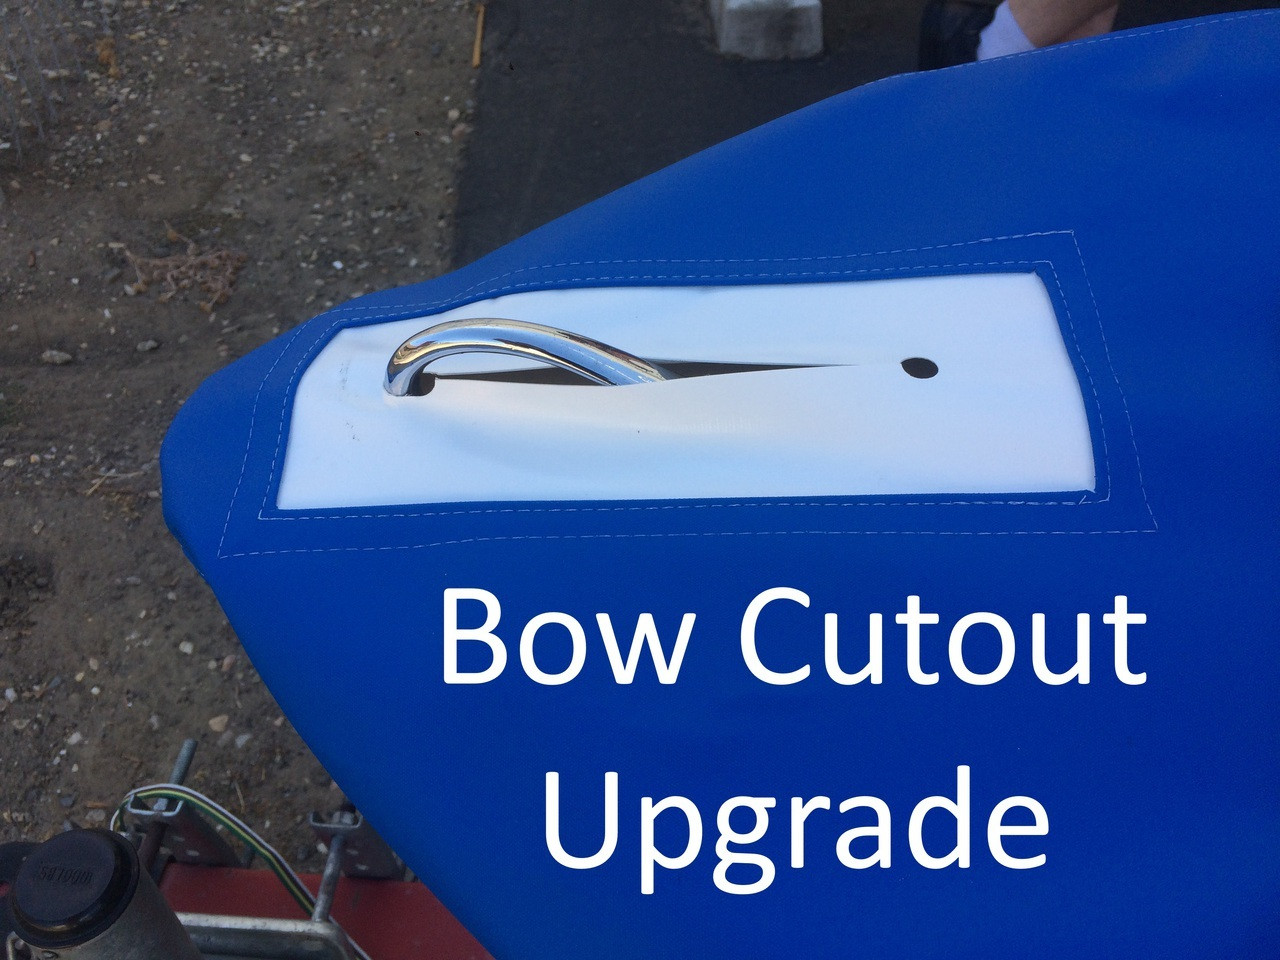 Optional Upgrade: Add a Bow Cover for easy access to your bow handle. 
